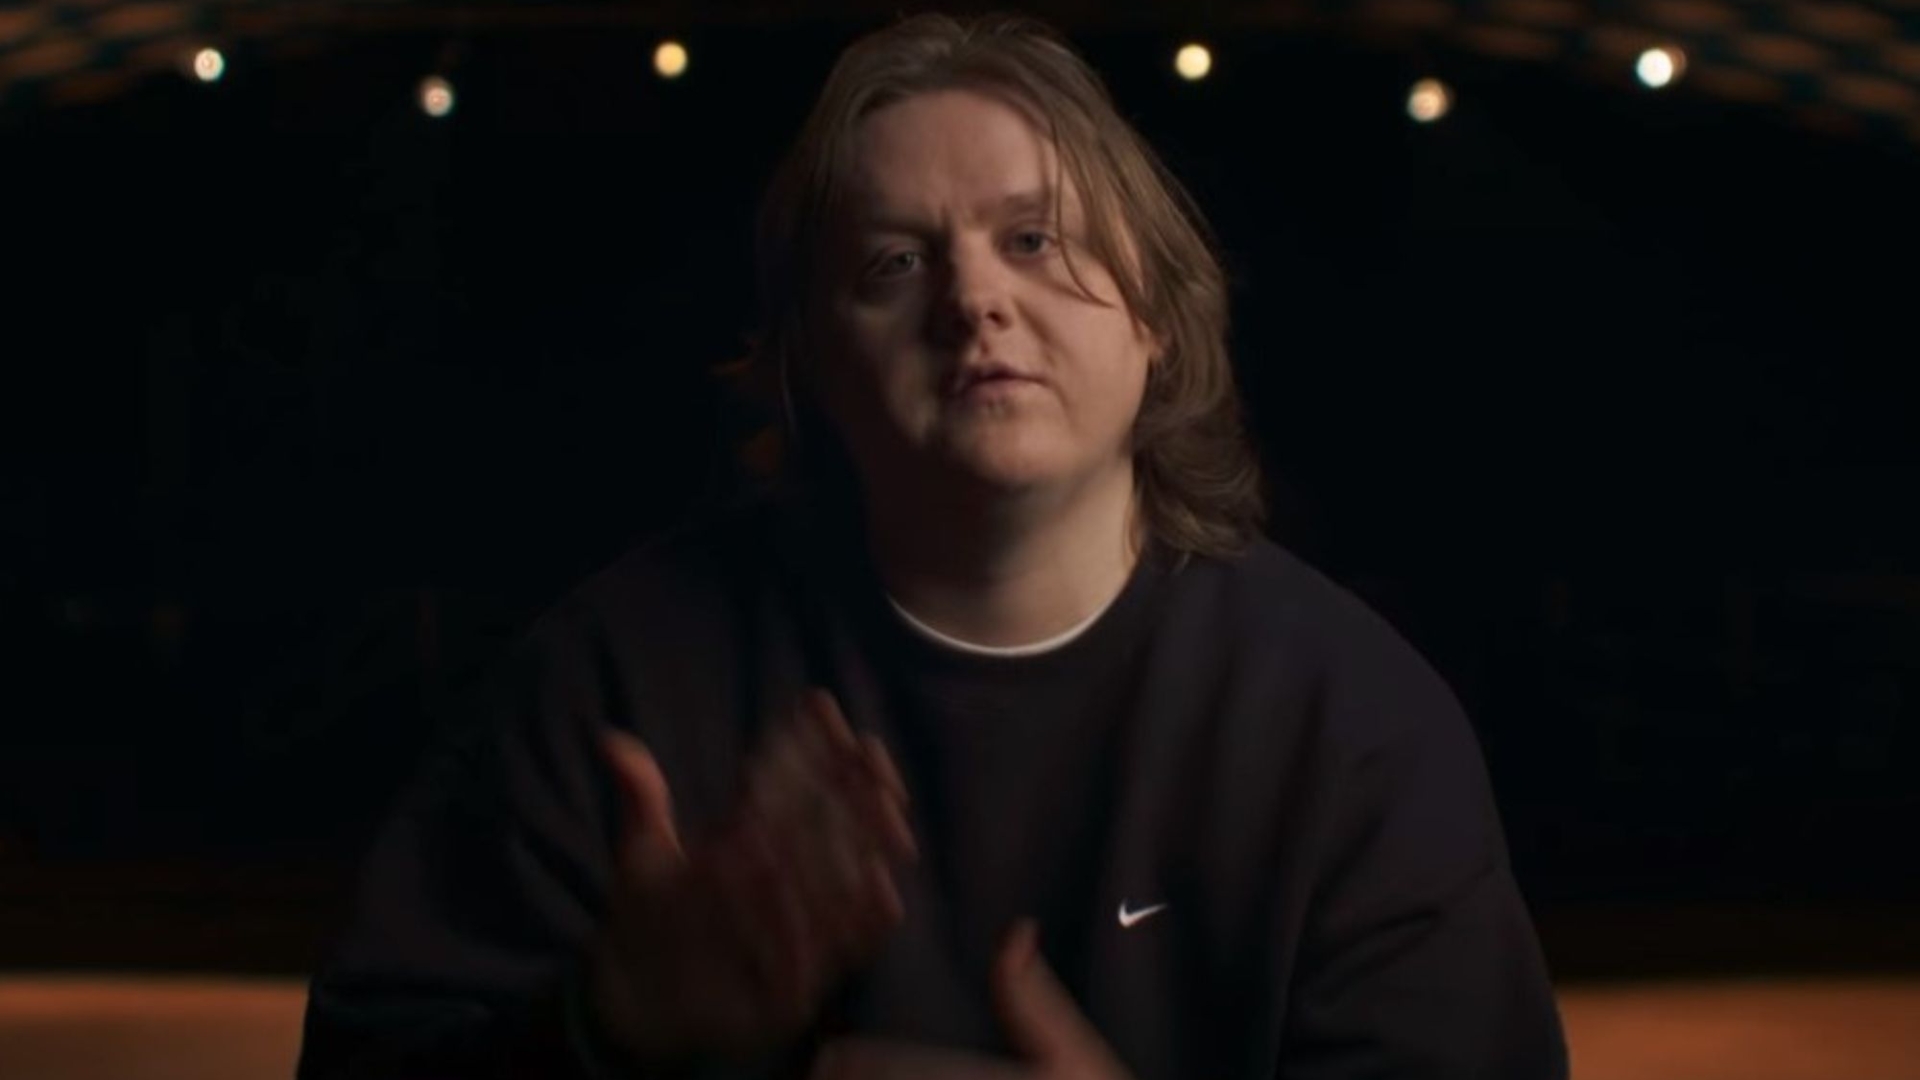 Lewis Capaldi's mother bursts into tears over the horrific family tragedy he witnessed as a child